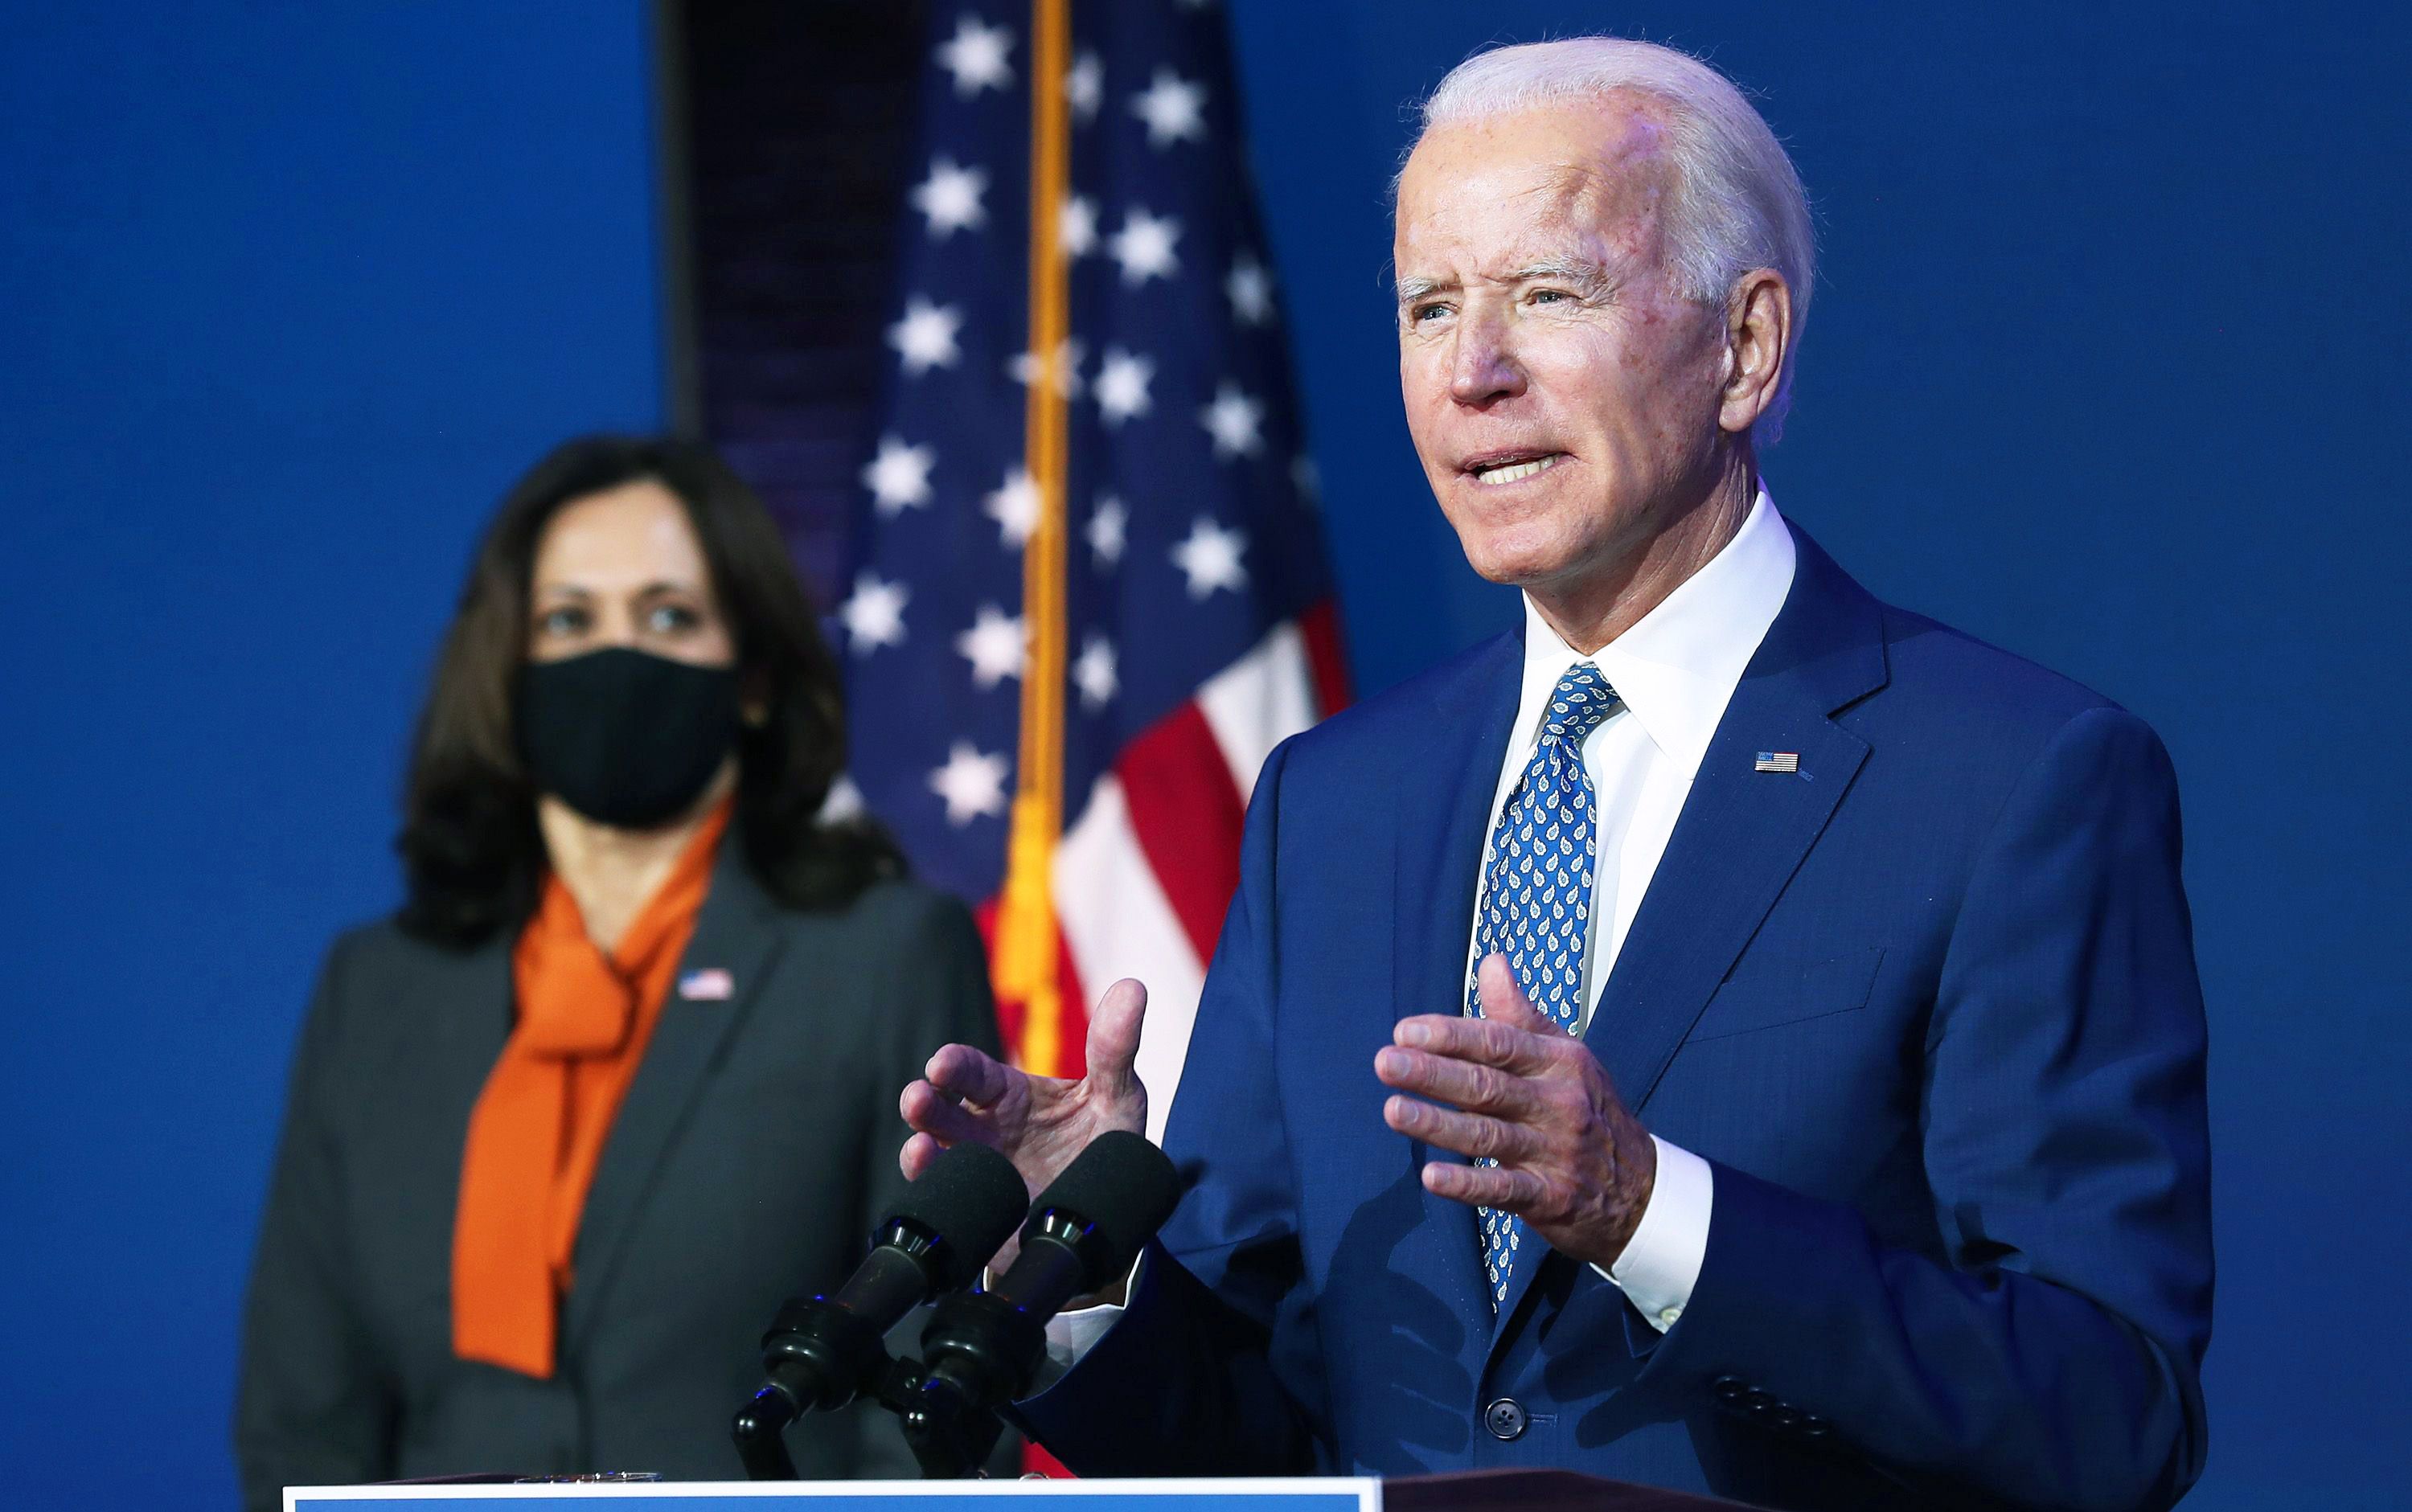 Biden reaffirms America’s trade, peace, security partnership with Africa